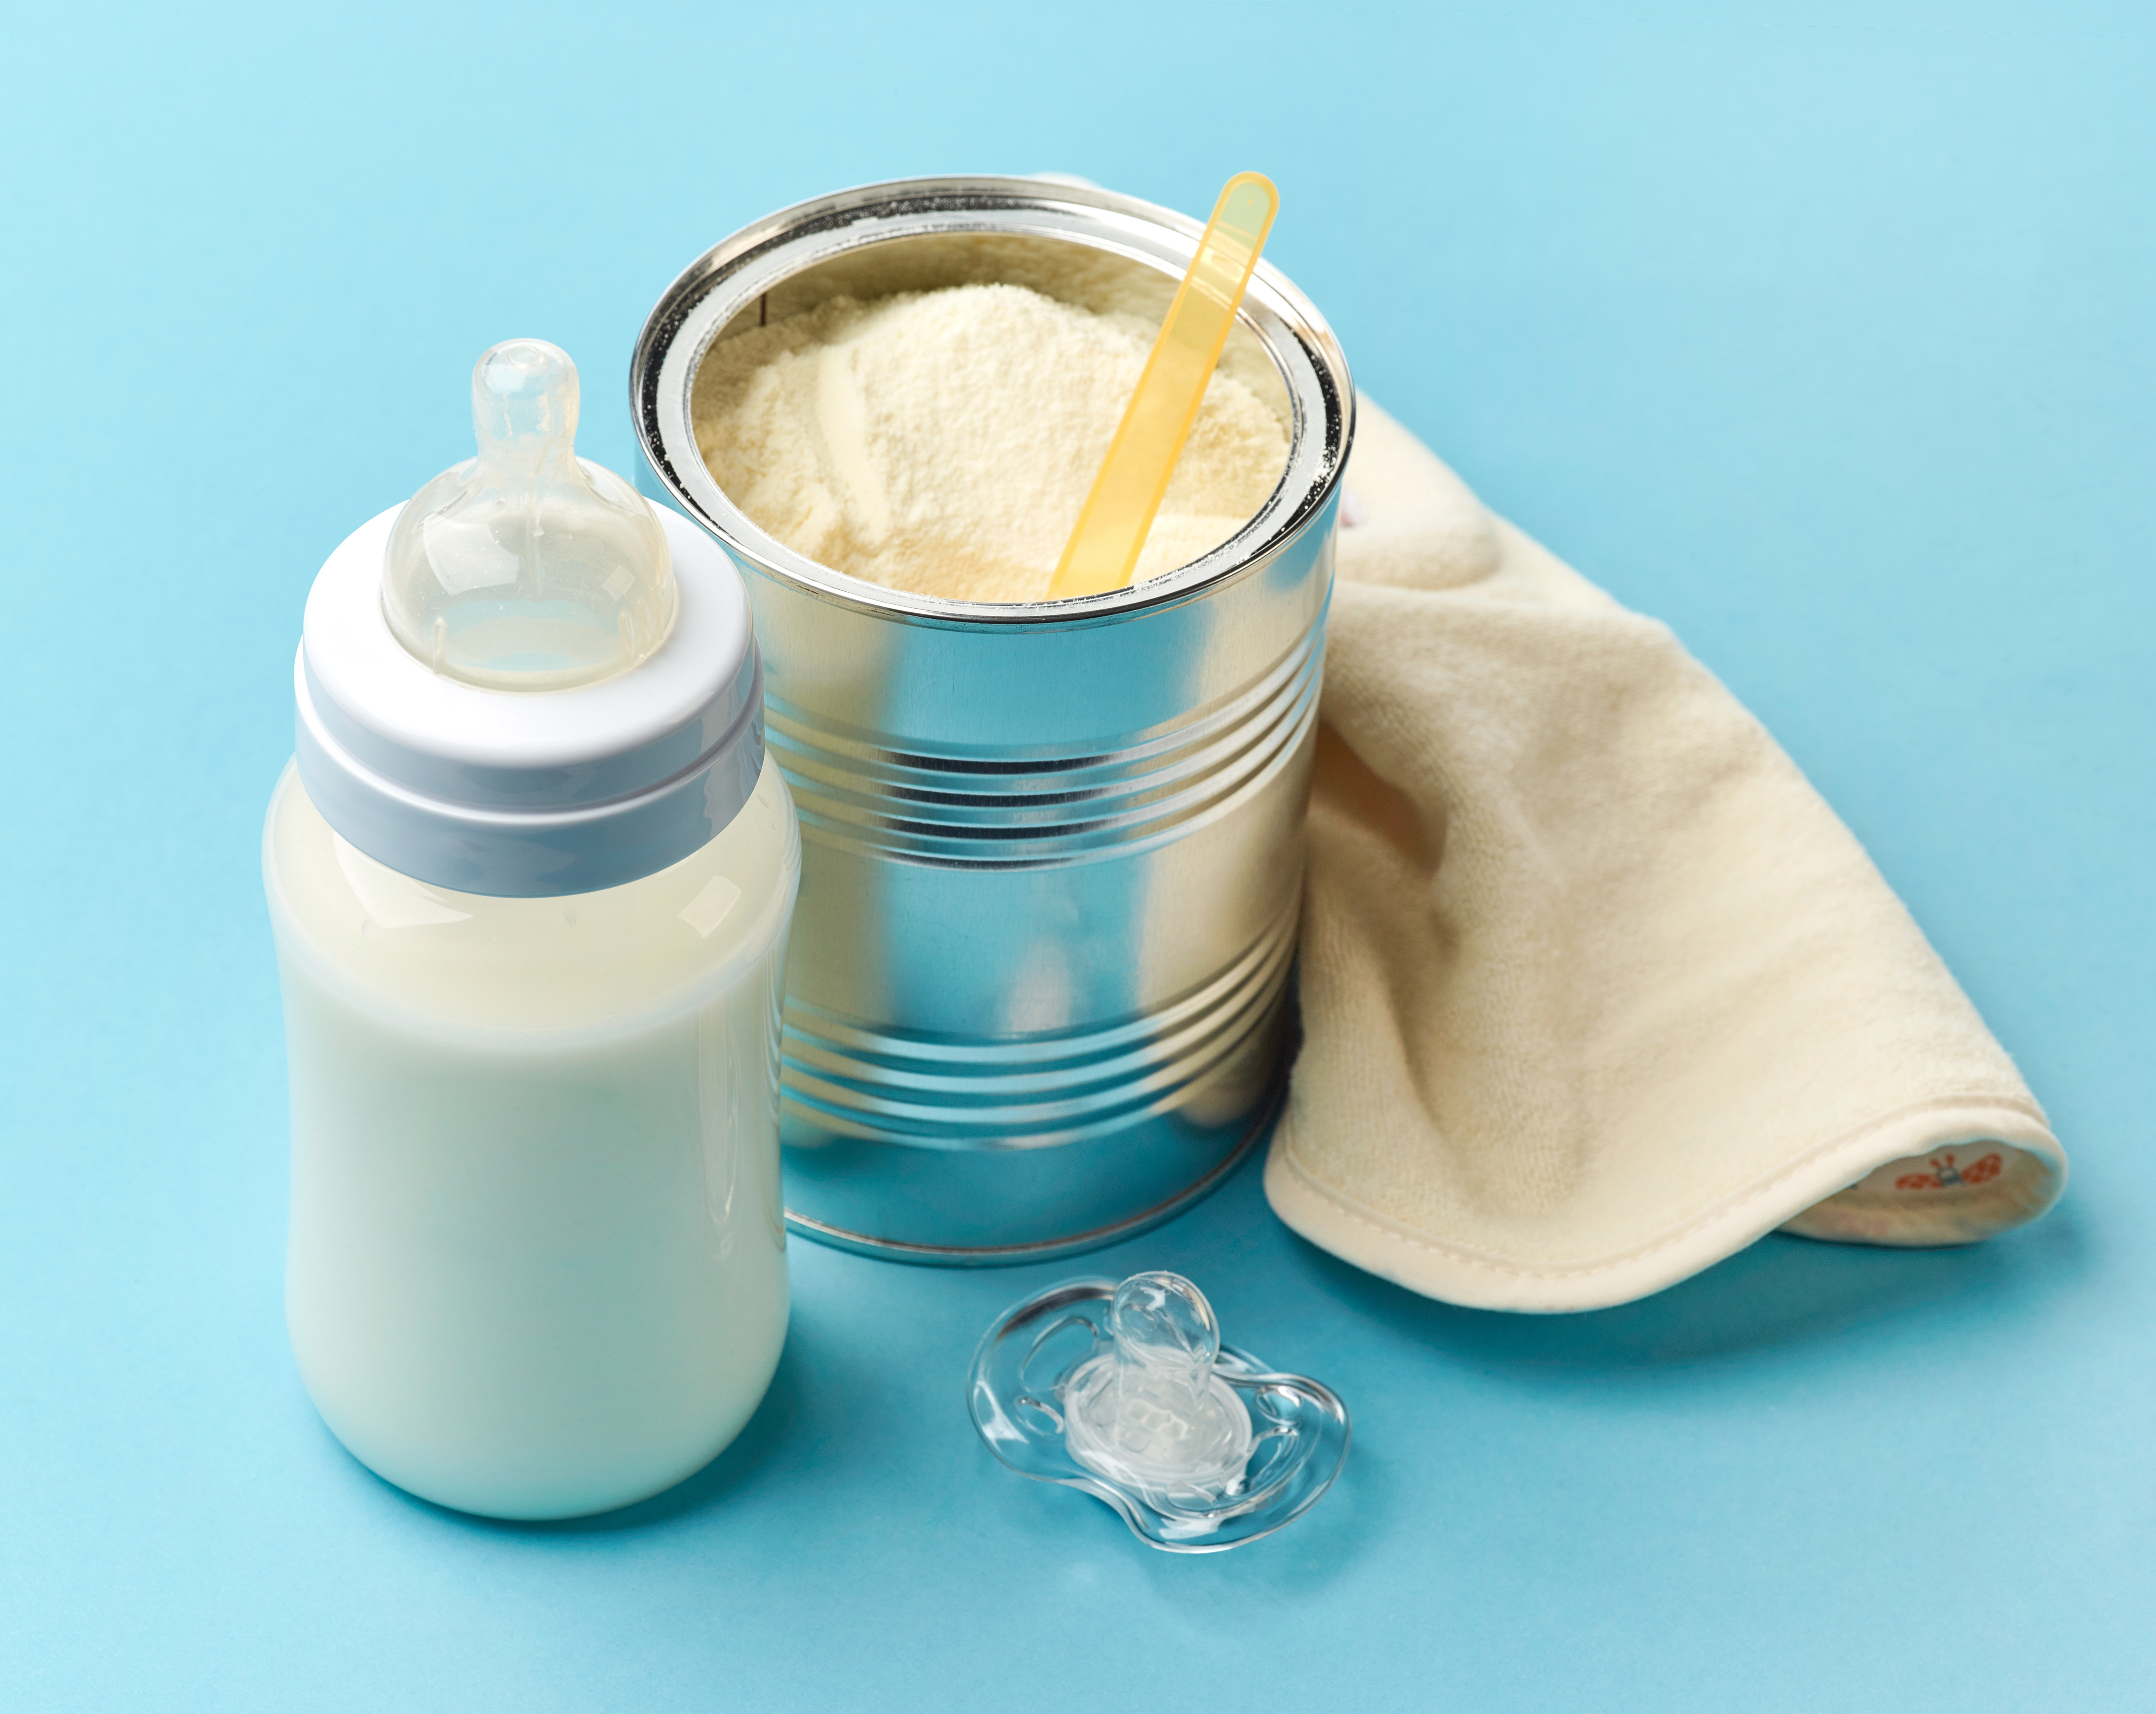 Open can of baby formula with a scoop inside of it next to a bottle filled with white liquid and a pacifier.